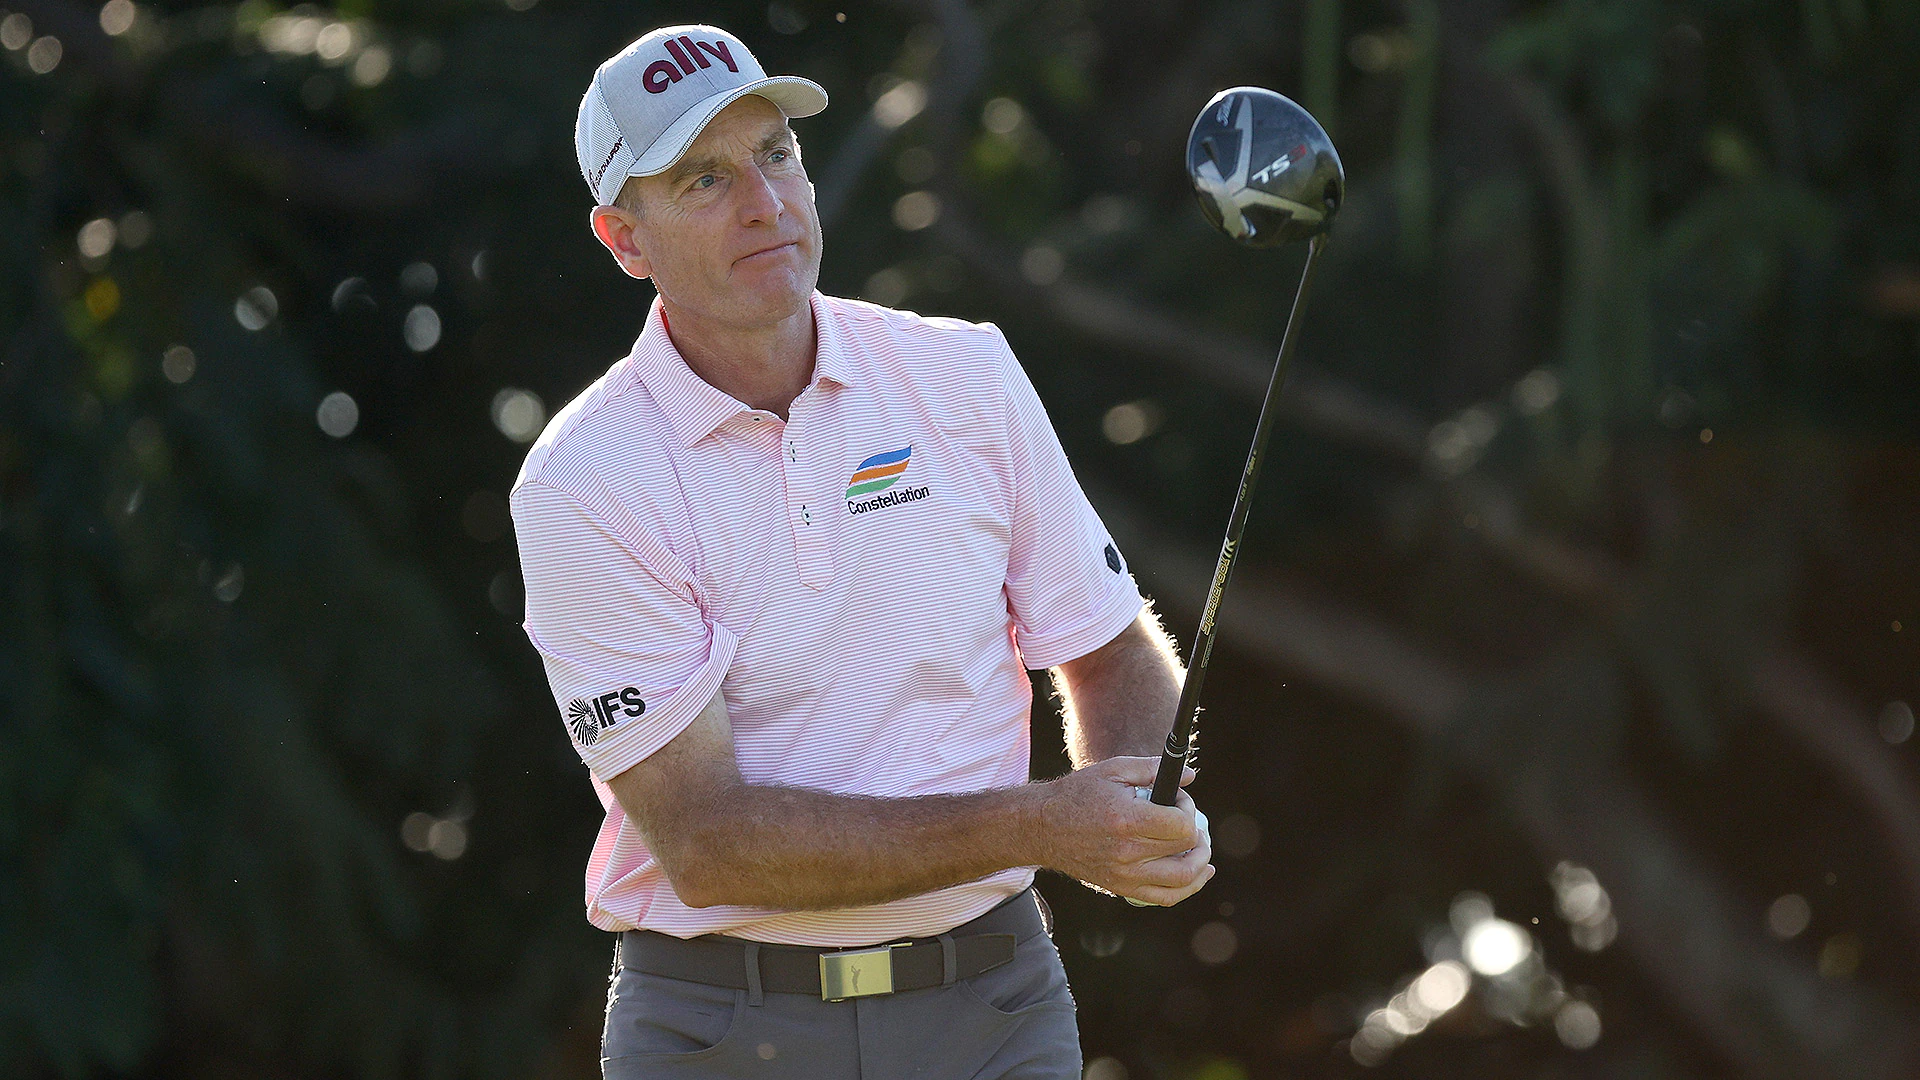 Jim Furyk, 51, aces way to 62; one off lead at Sony Open in Hawaii